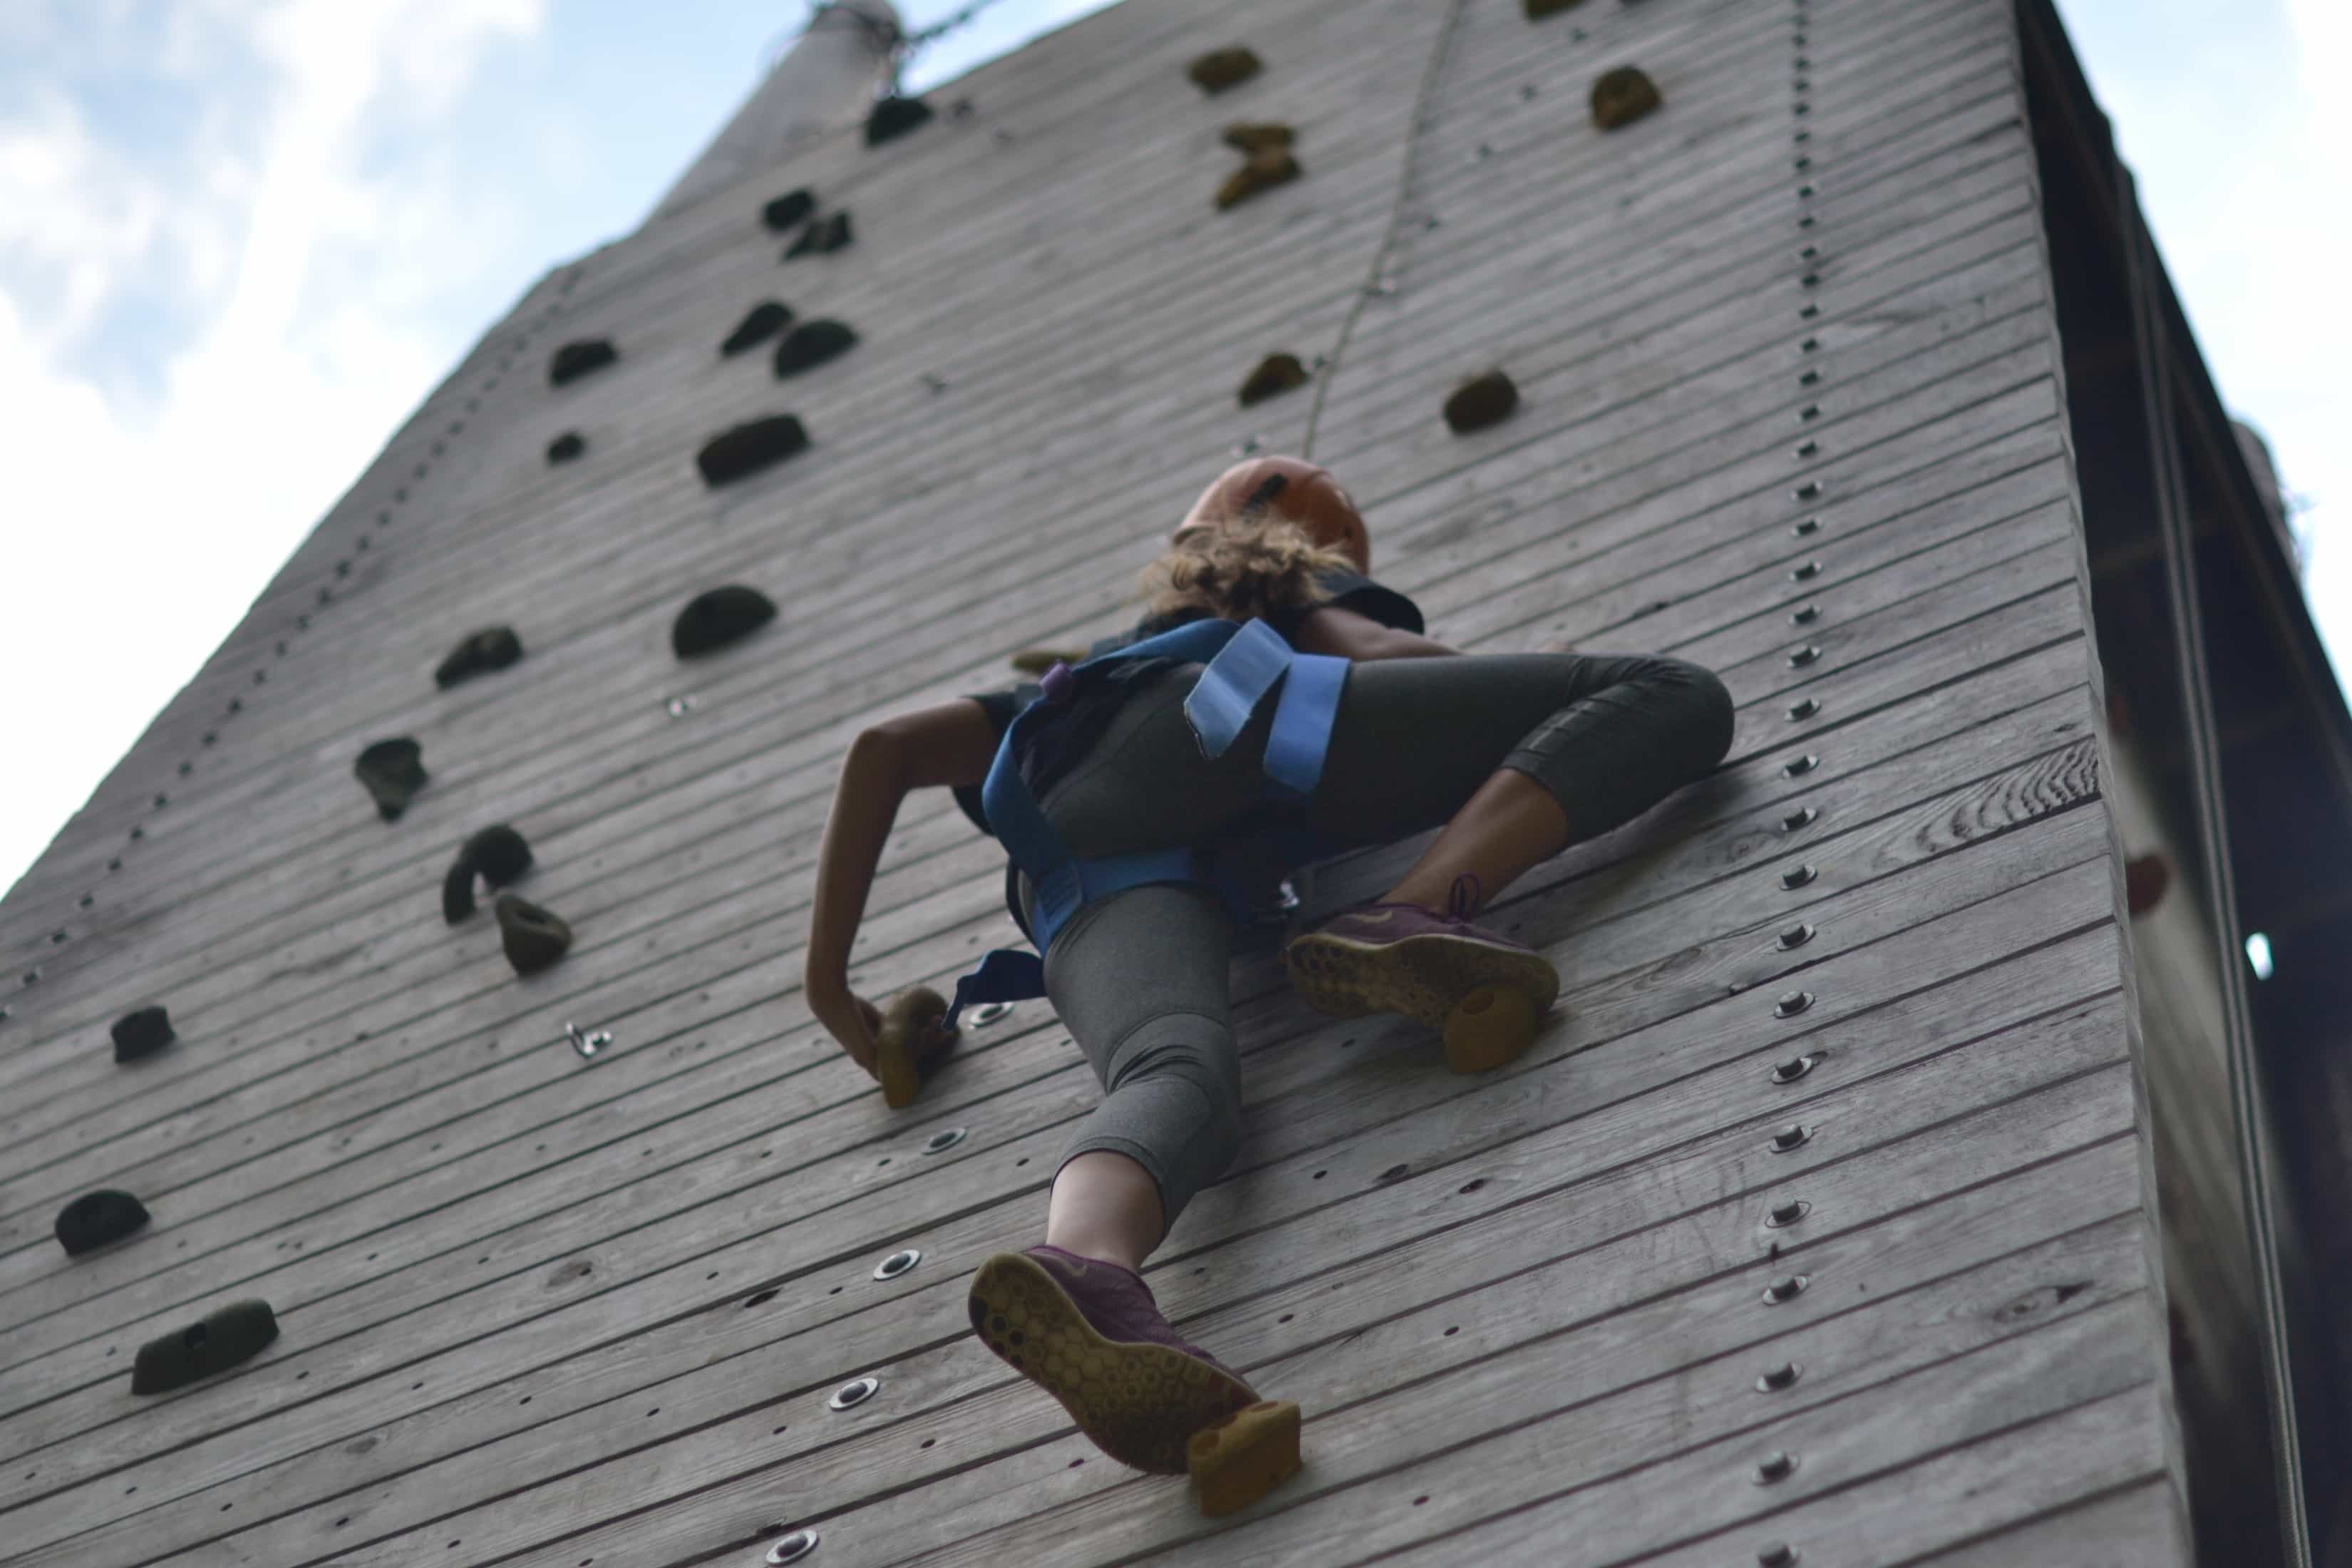 view from the ground of girl scaling the climbing wall